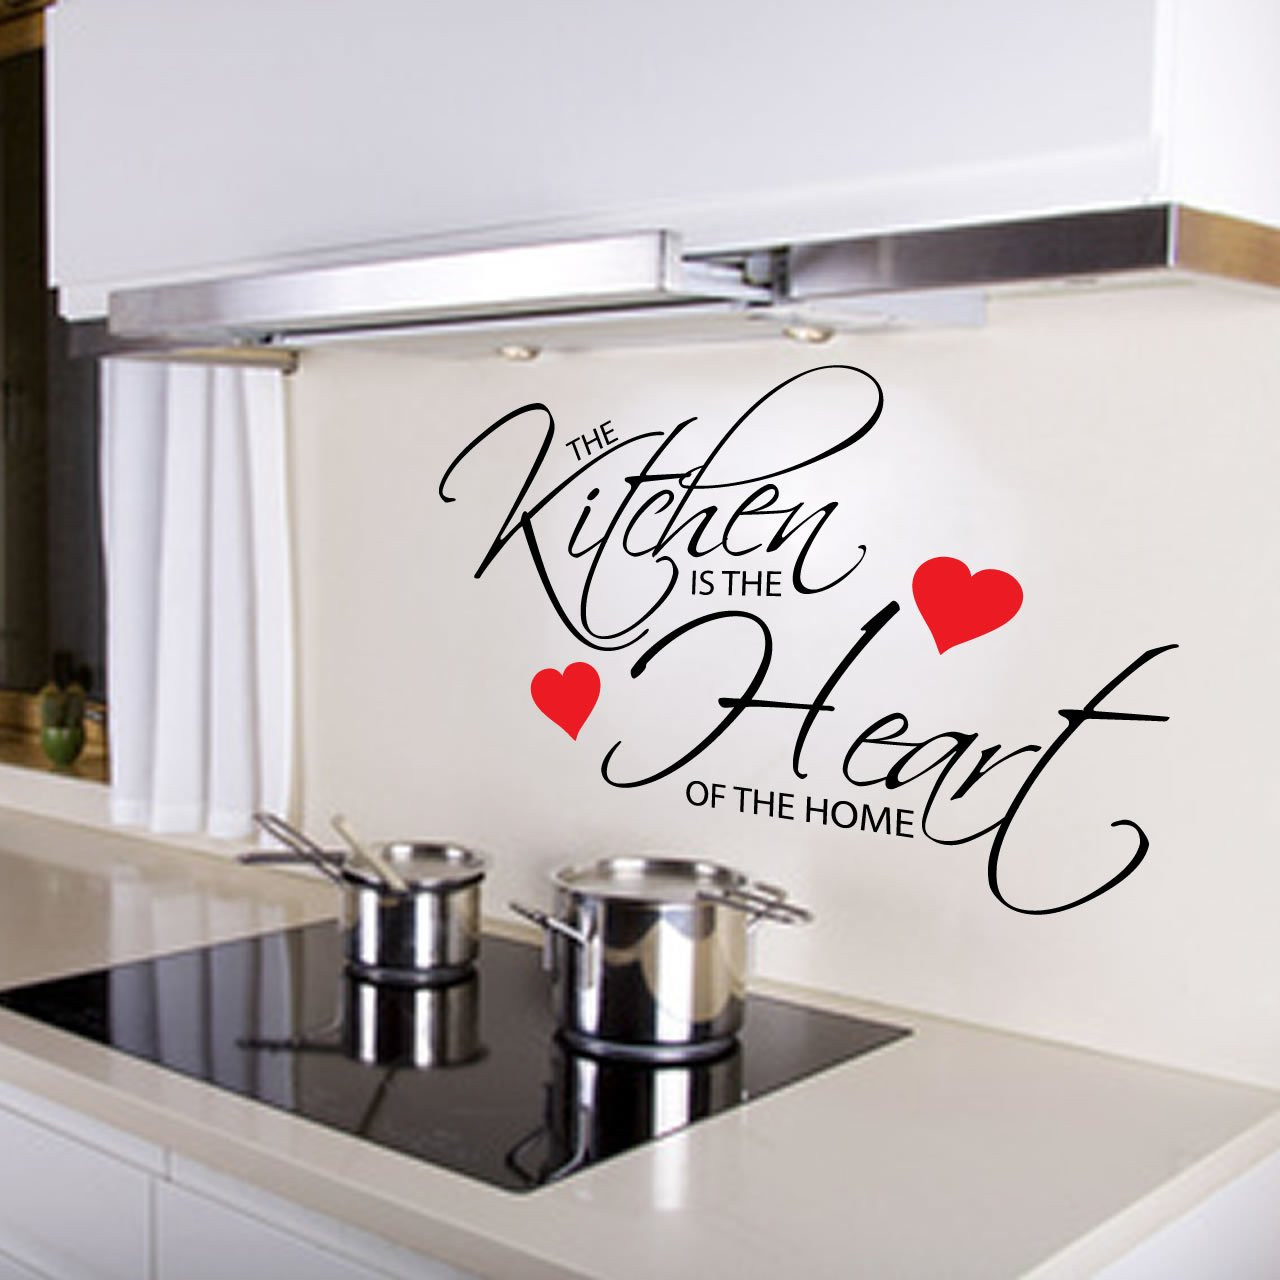 Kitchen Wall Decal Quotes Elegant Kitchen is the Heart the Home Quote Wall Sticker